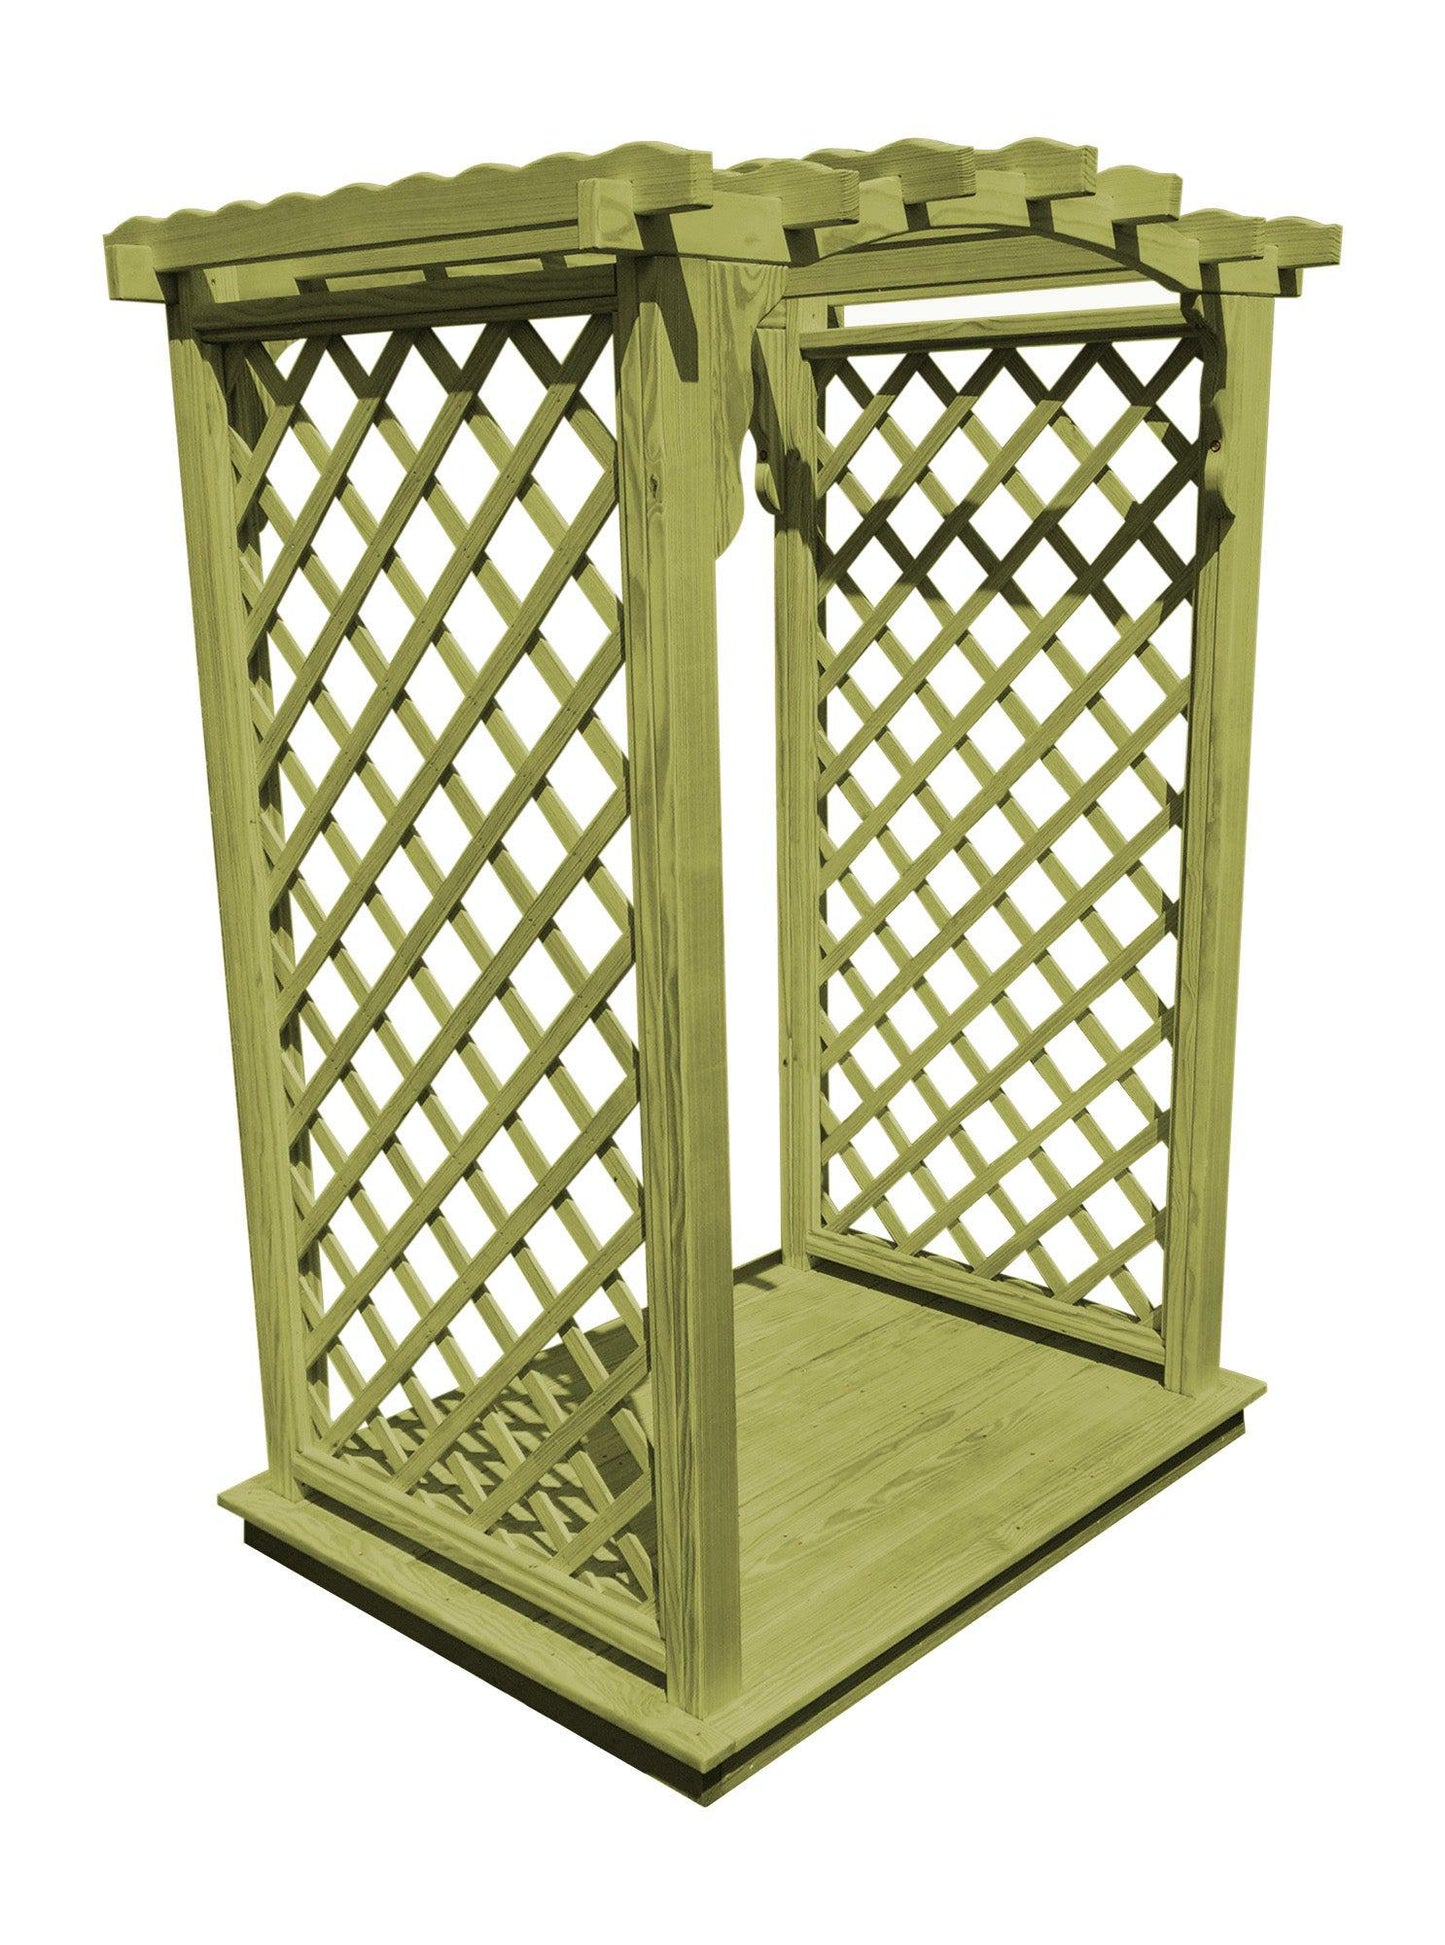 A&L FURNITURE CO. 5' Jamesport Pressure Treated Pine Arbor & Deck - LEAD TIME TO SHIP 10 BUSINESS DAYS